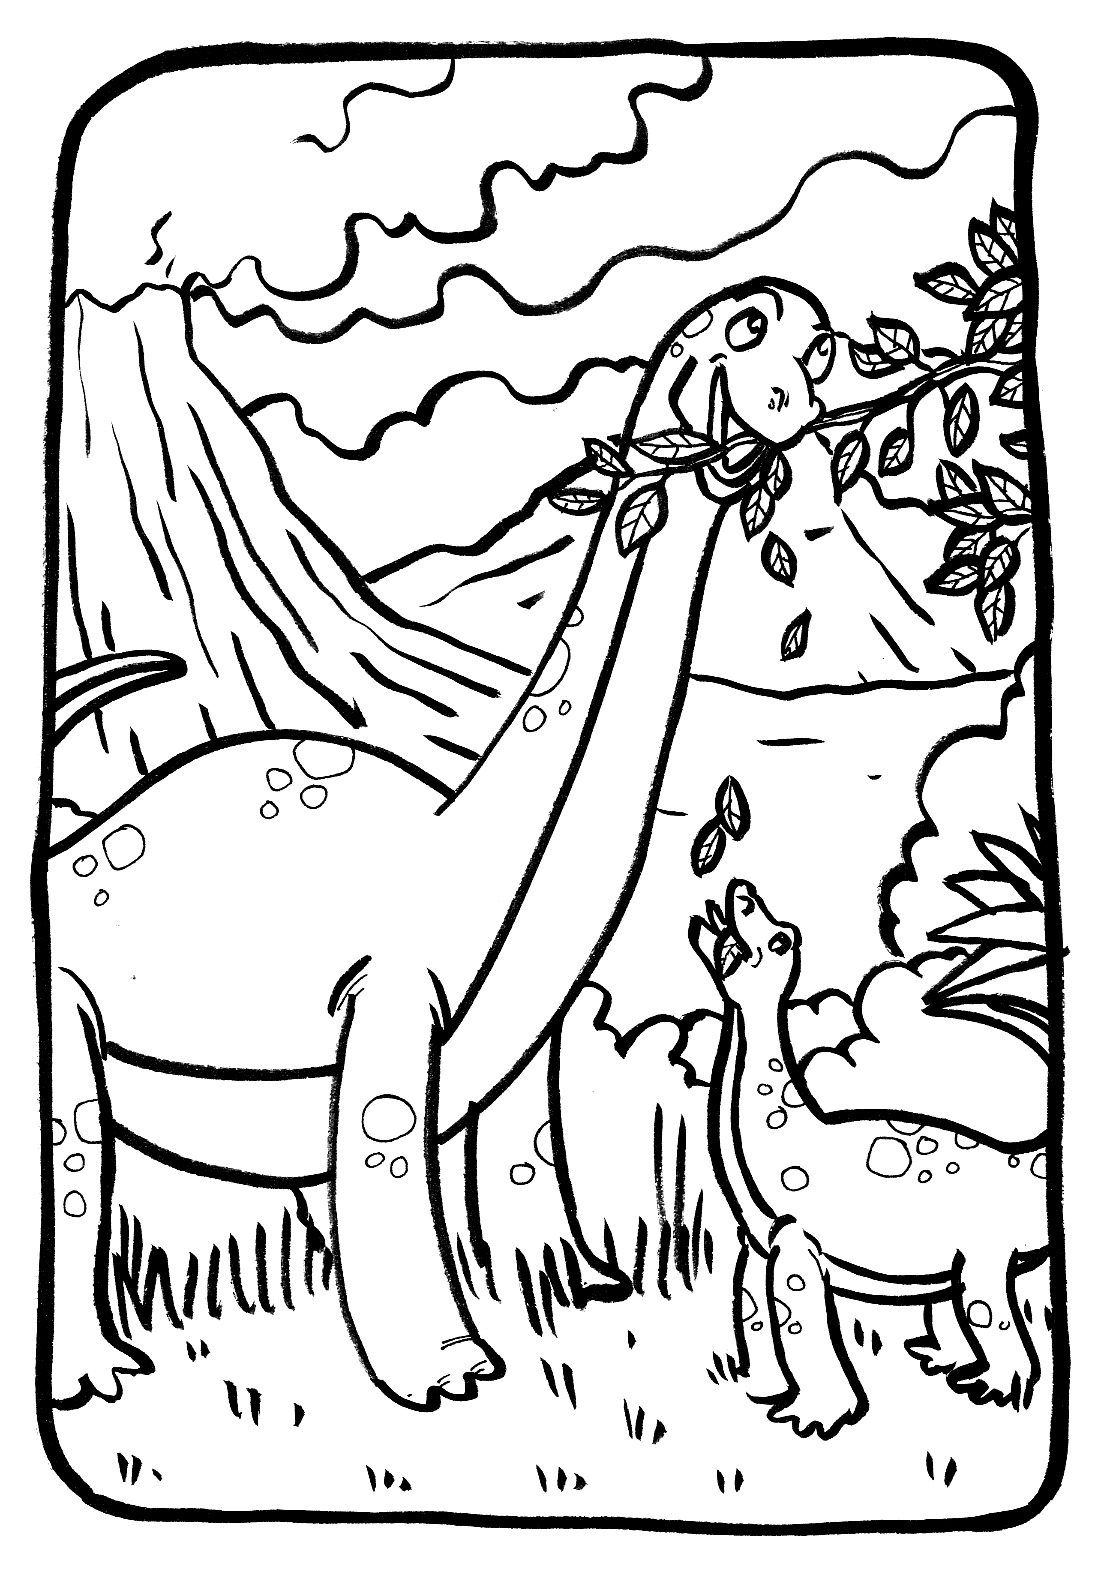 Another beautiful brachiosaurus to put in colors